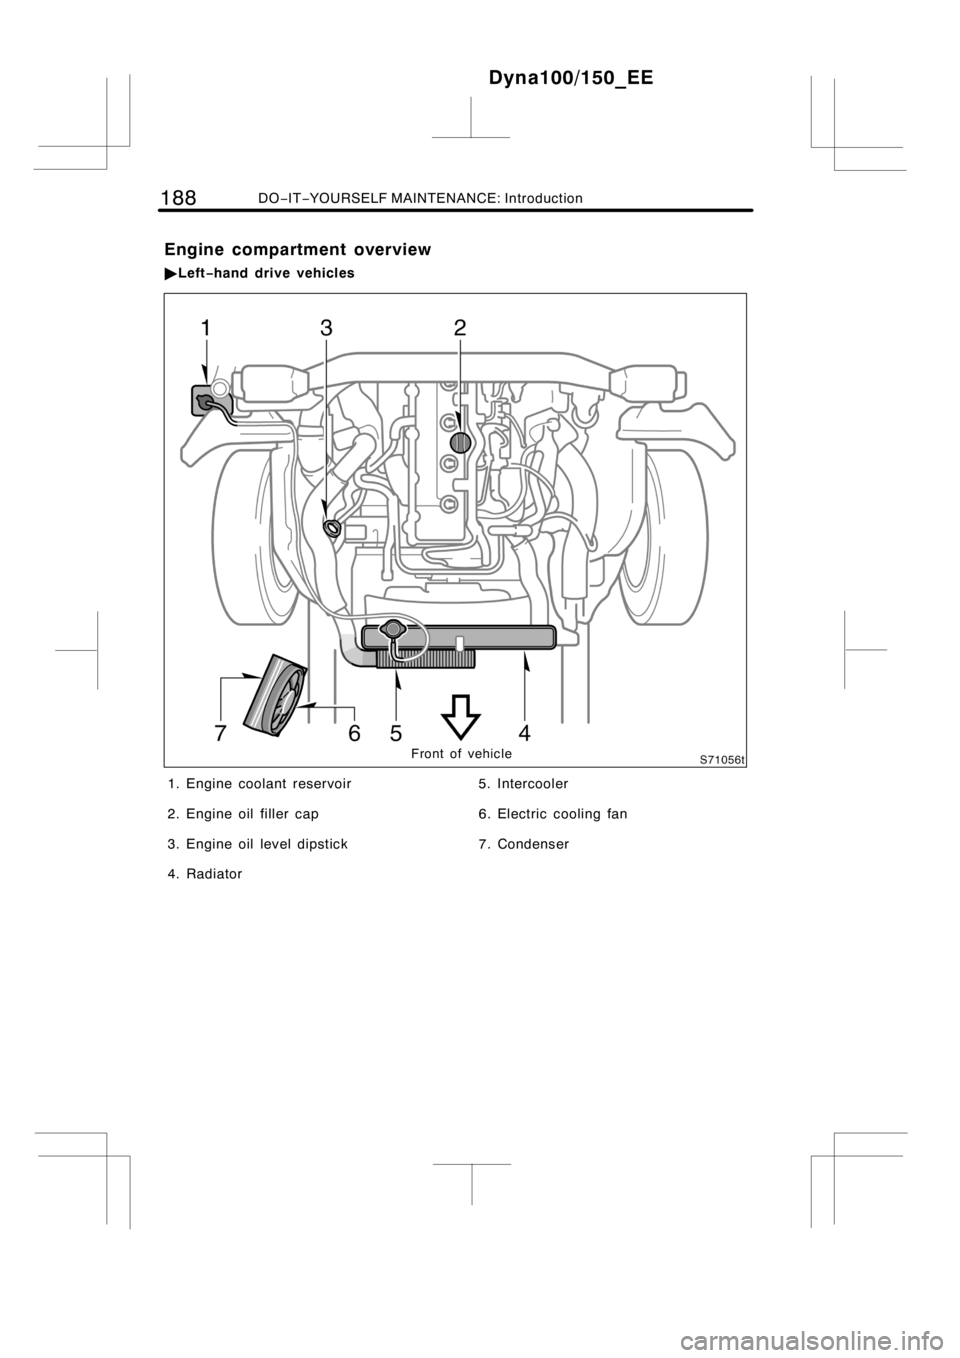 TOYOTA DYNA 100/150 2012  Owners Manual (in English) 188DO−IT−YOURSELF MAINTENANCE: Introduction
Front of vehicle
1. Engine coolant reservoir
2. Engine oil filler cap
3. Engine oil level dipstick
4. Radiator5. Intercooler
6. Electric cooling fan
7. 